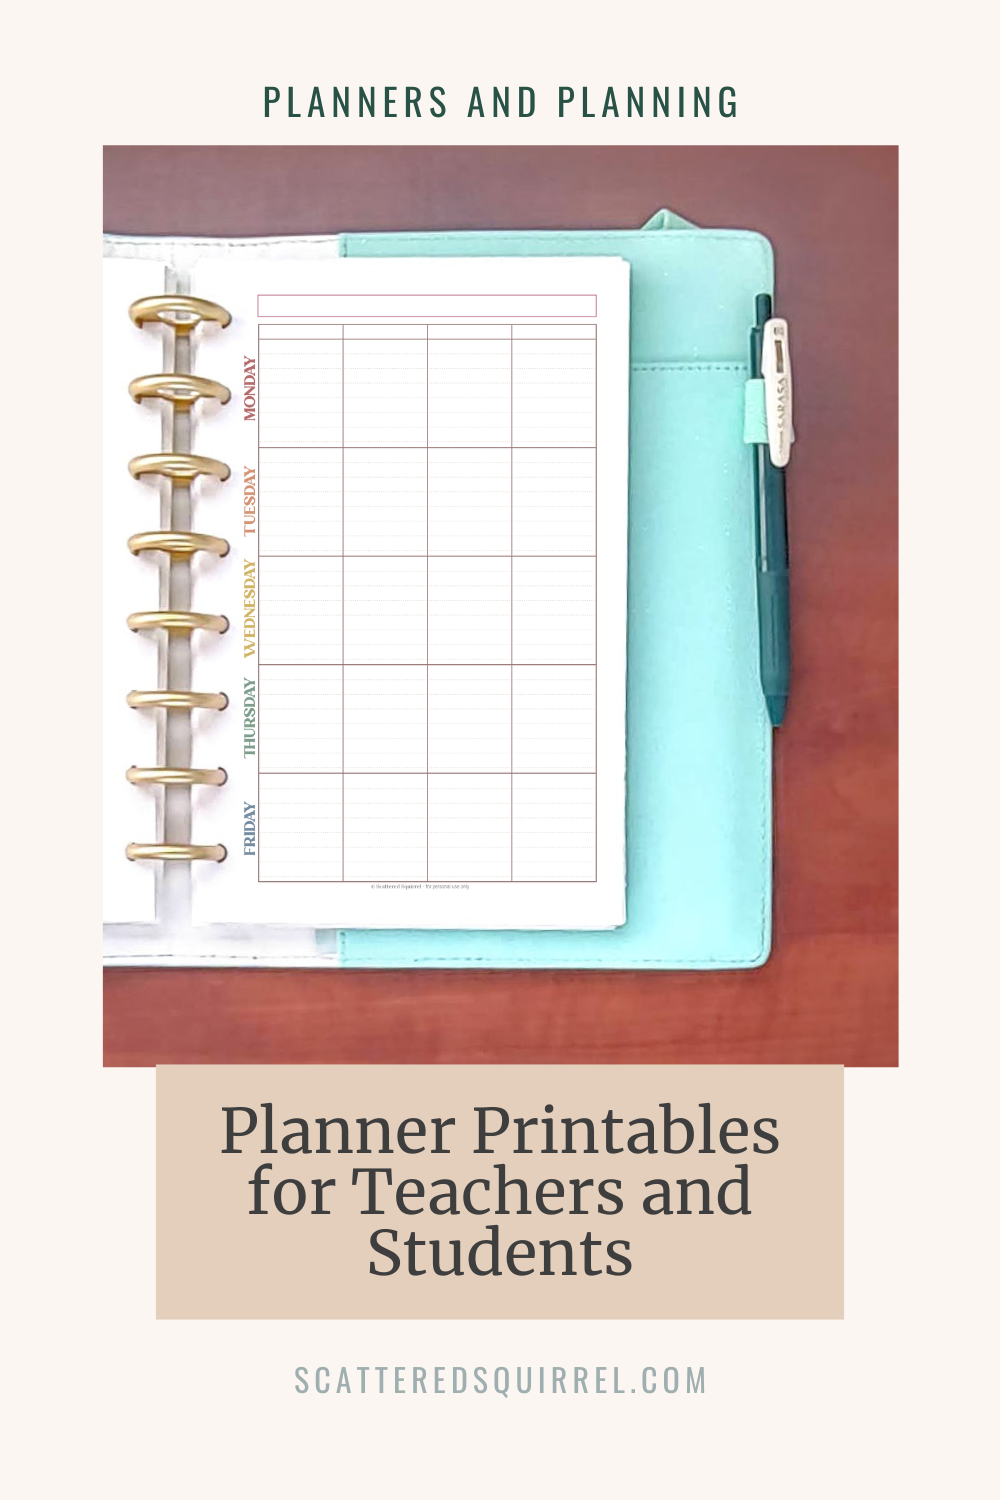 Essential Planner Printables for Teachers and Students